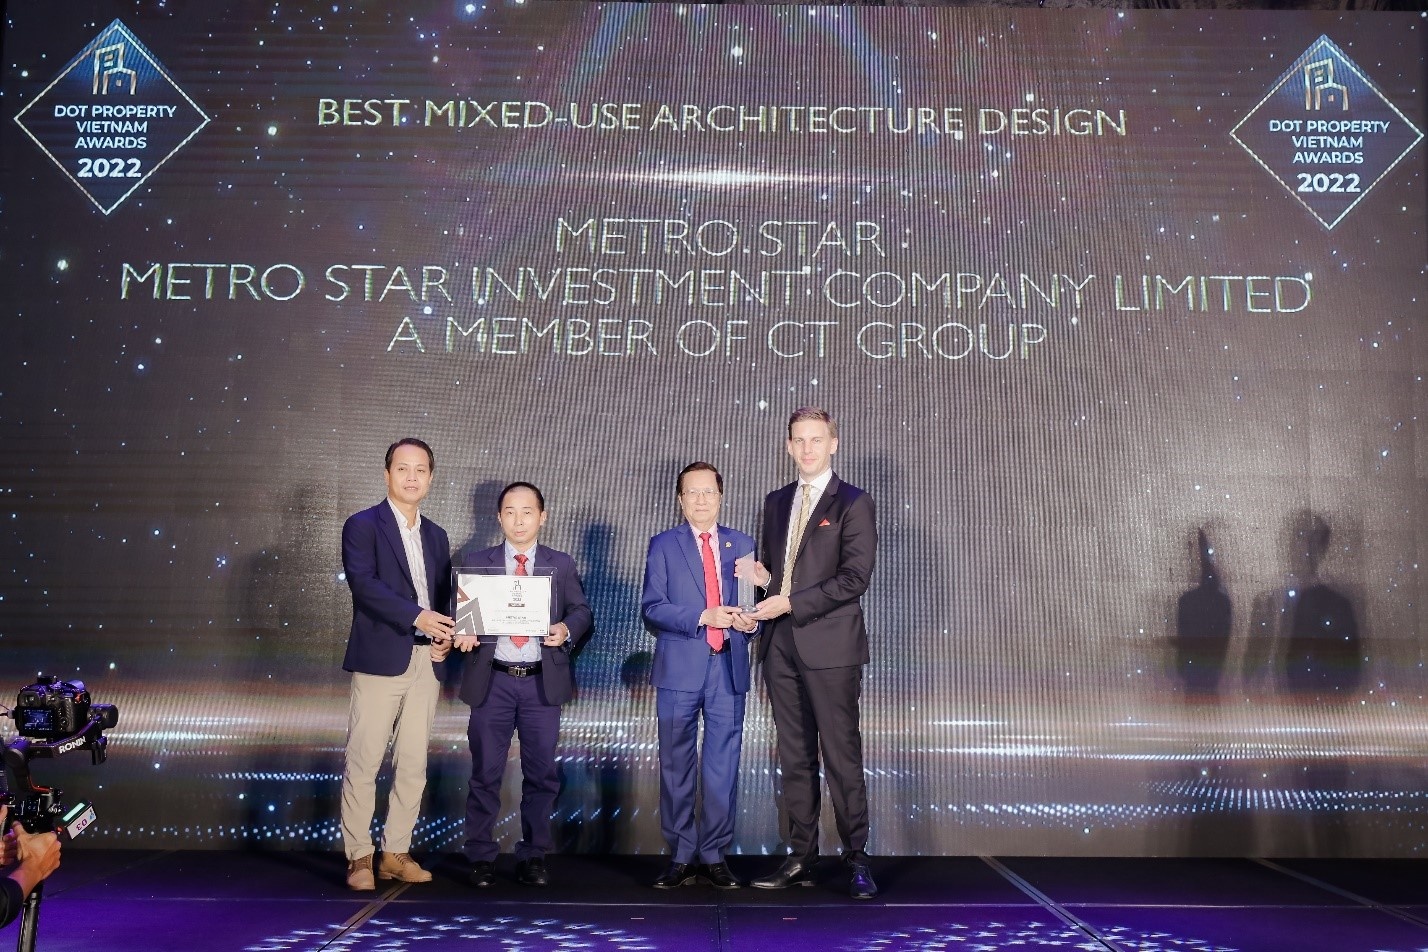 The Metro Star wins “Best Mixed-Use Architecture Design Vietnam 2022”